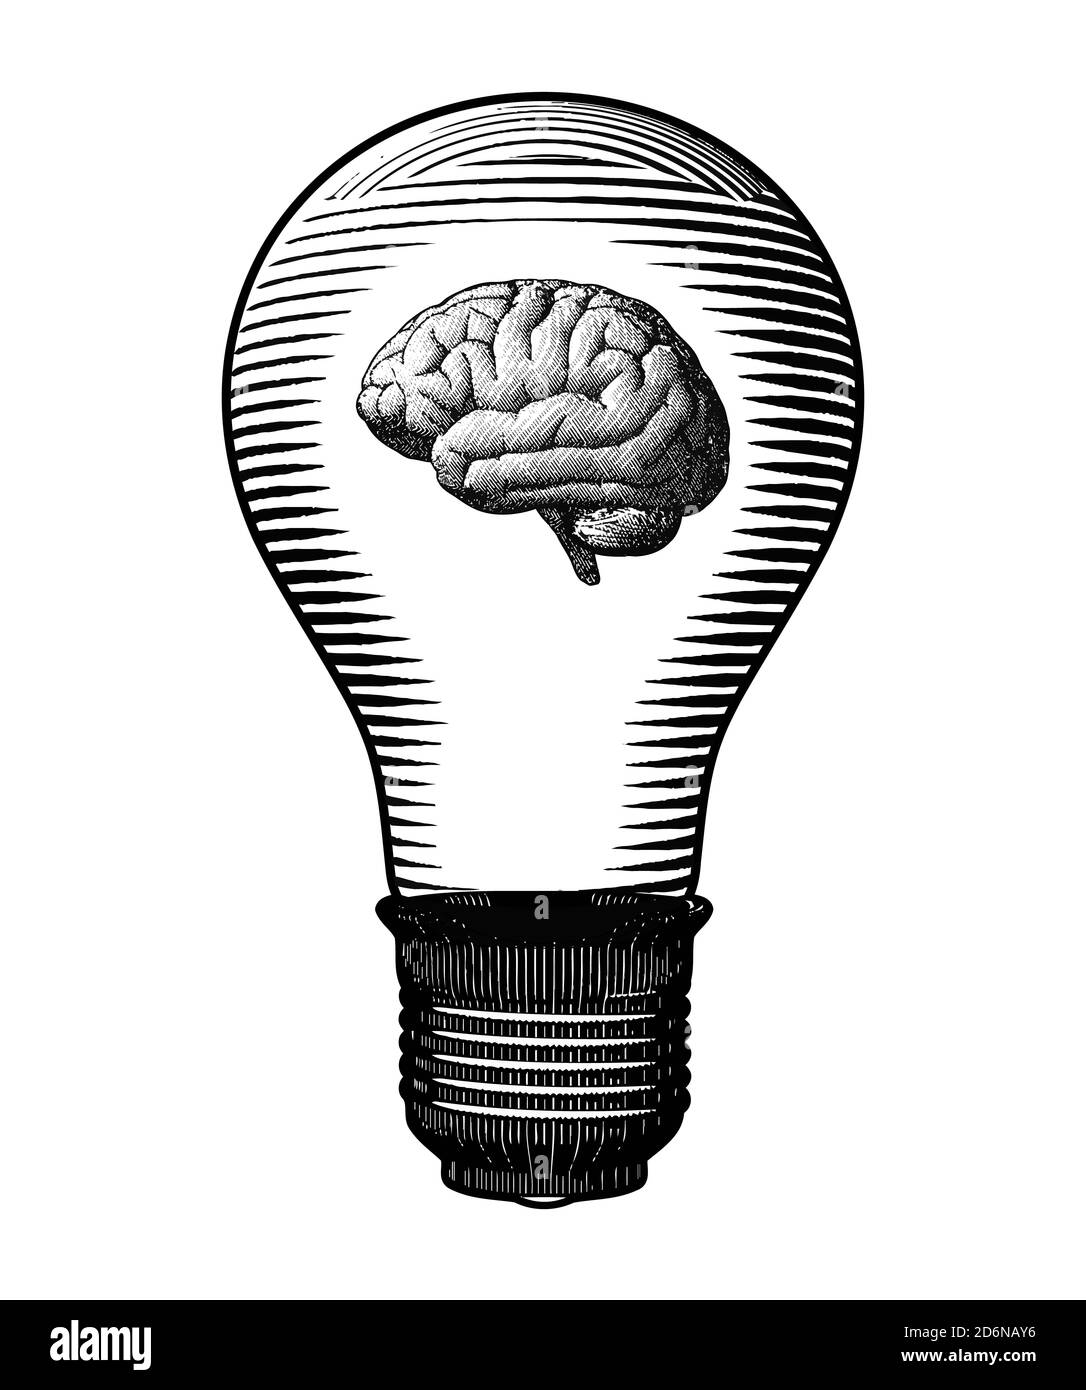 Brain inside the light bulb black and white engraving drawing style  isolated on white background Stock Photo - Alamy